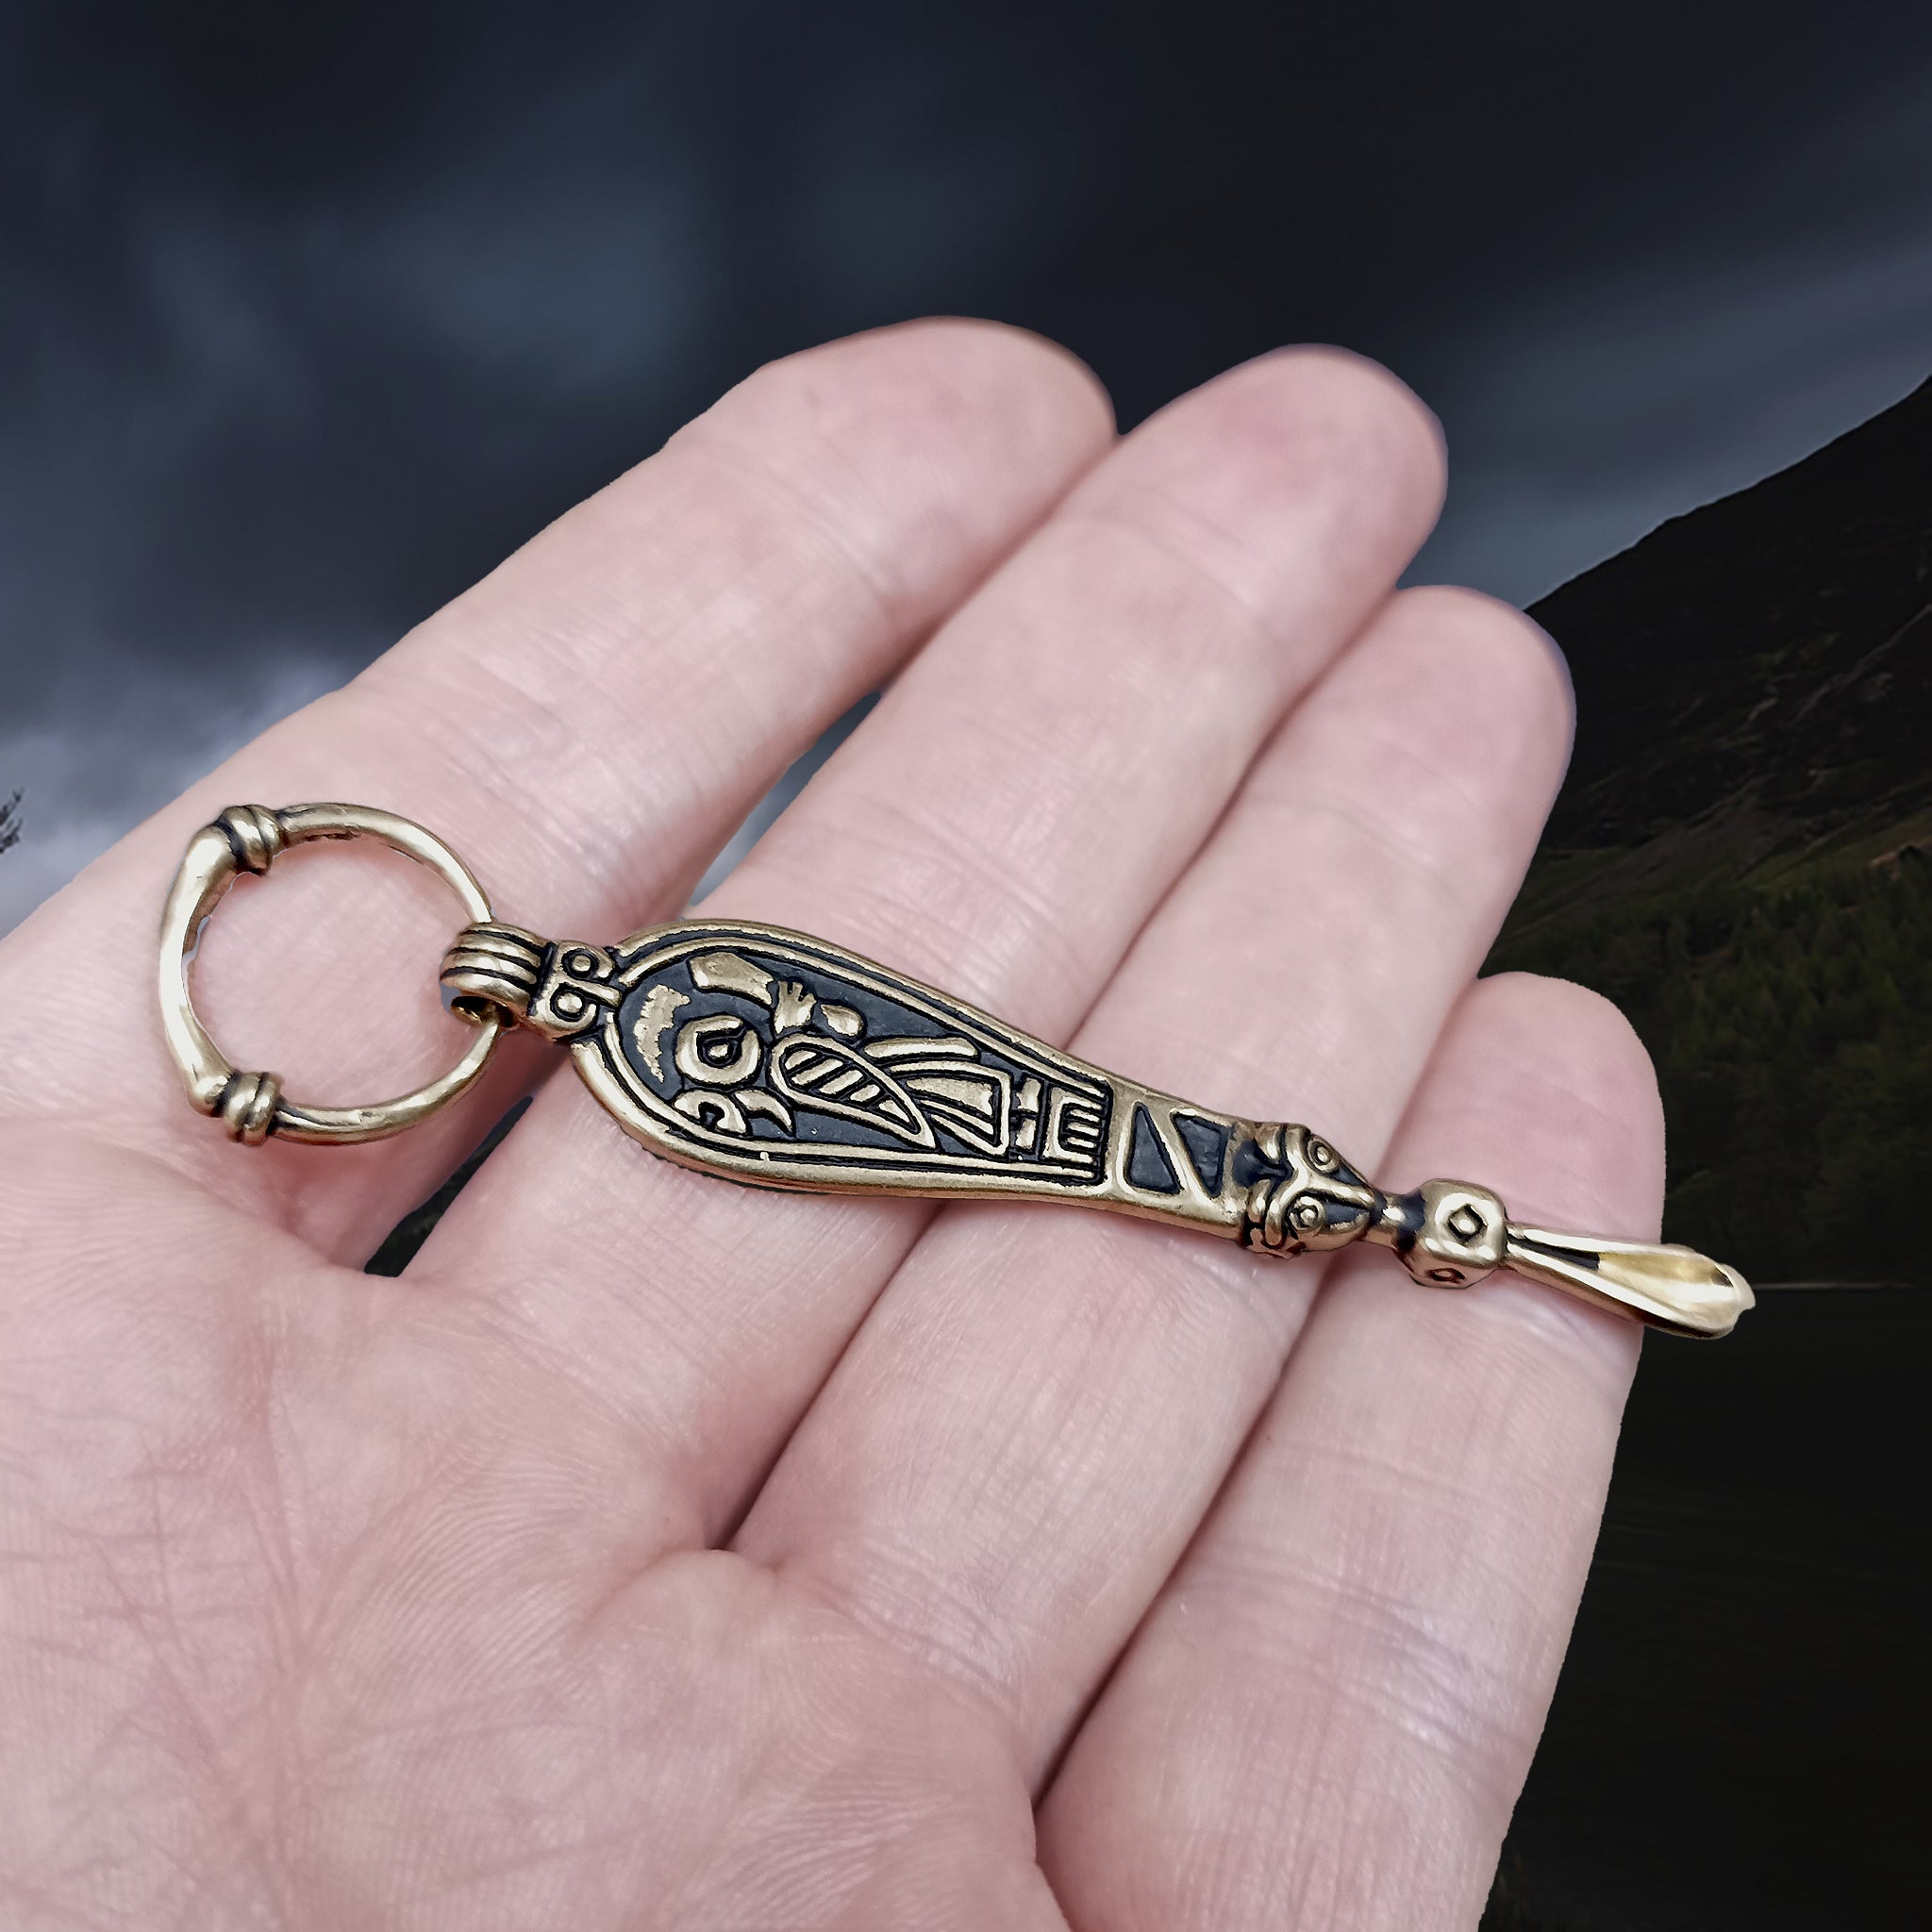 Bronze Ear Spoon Viking Pendant with Ring Hanger on Hand - Angle View